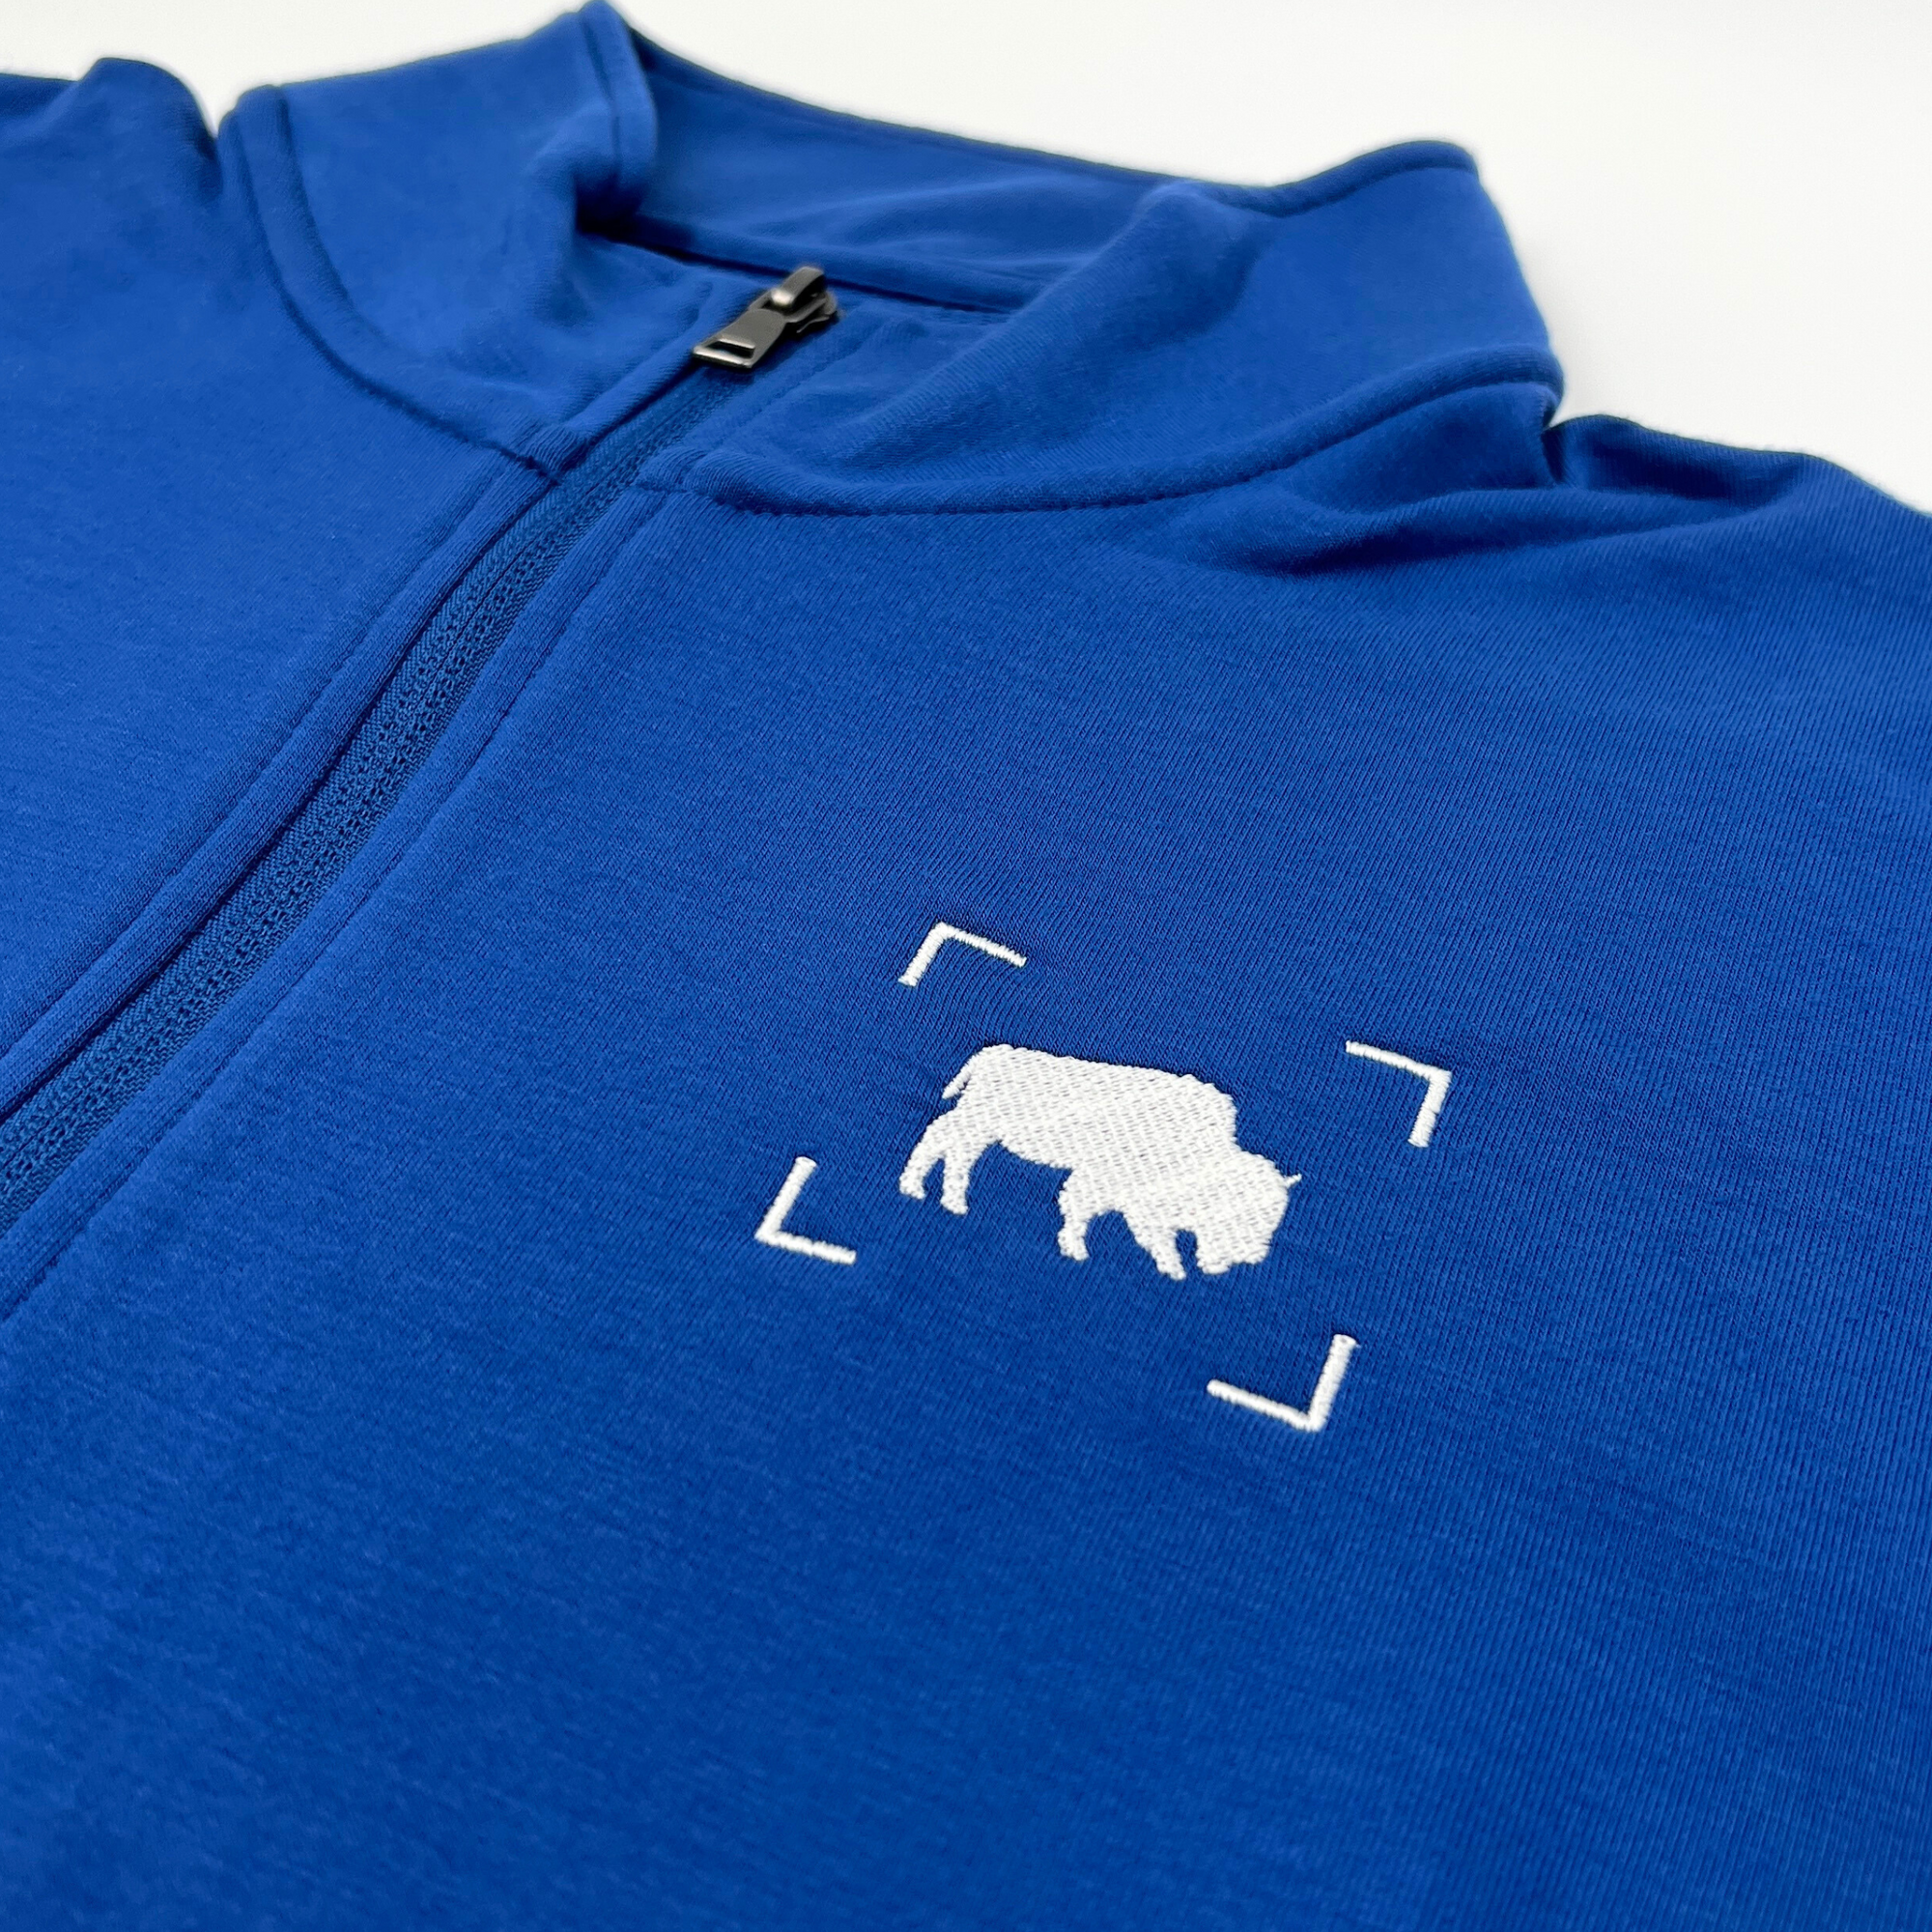 BFLO Slate Blue With Embroidered Shutter Buffalo Quarter Zip